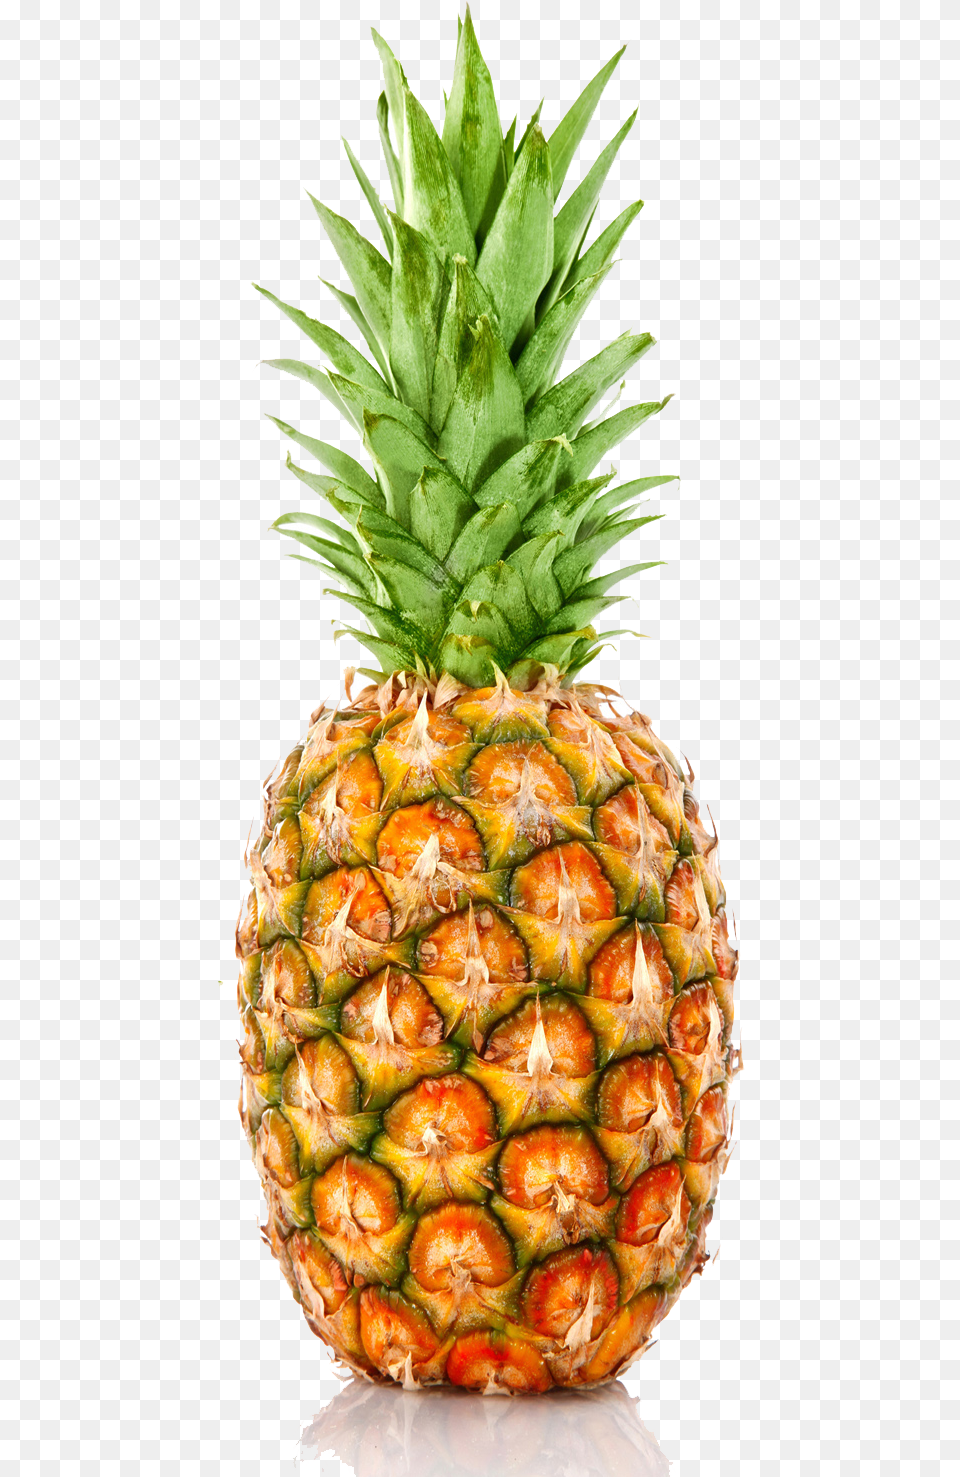 Pineapple Transparent Images Pineapple With Transparent Background, Food, Fruit, Plant, Produce Png